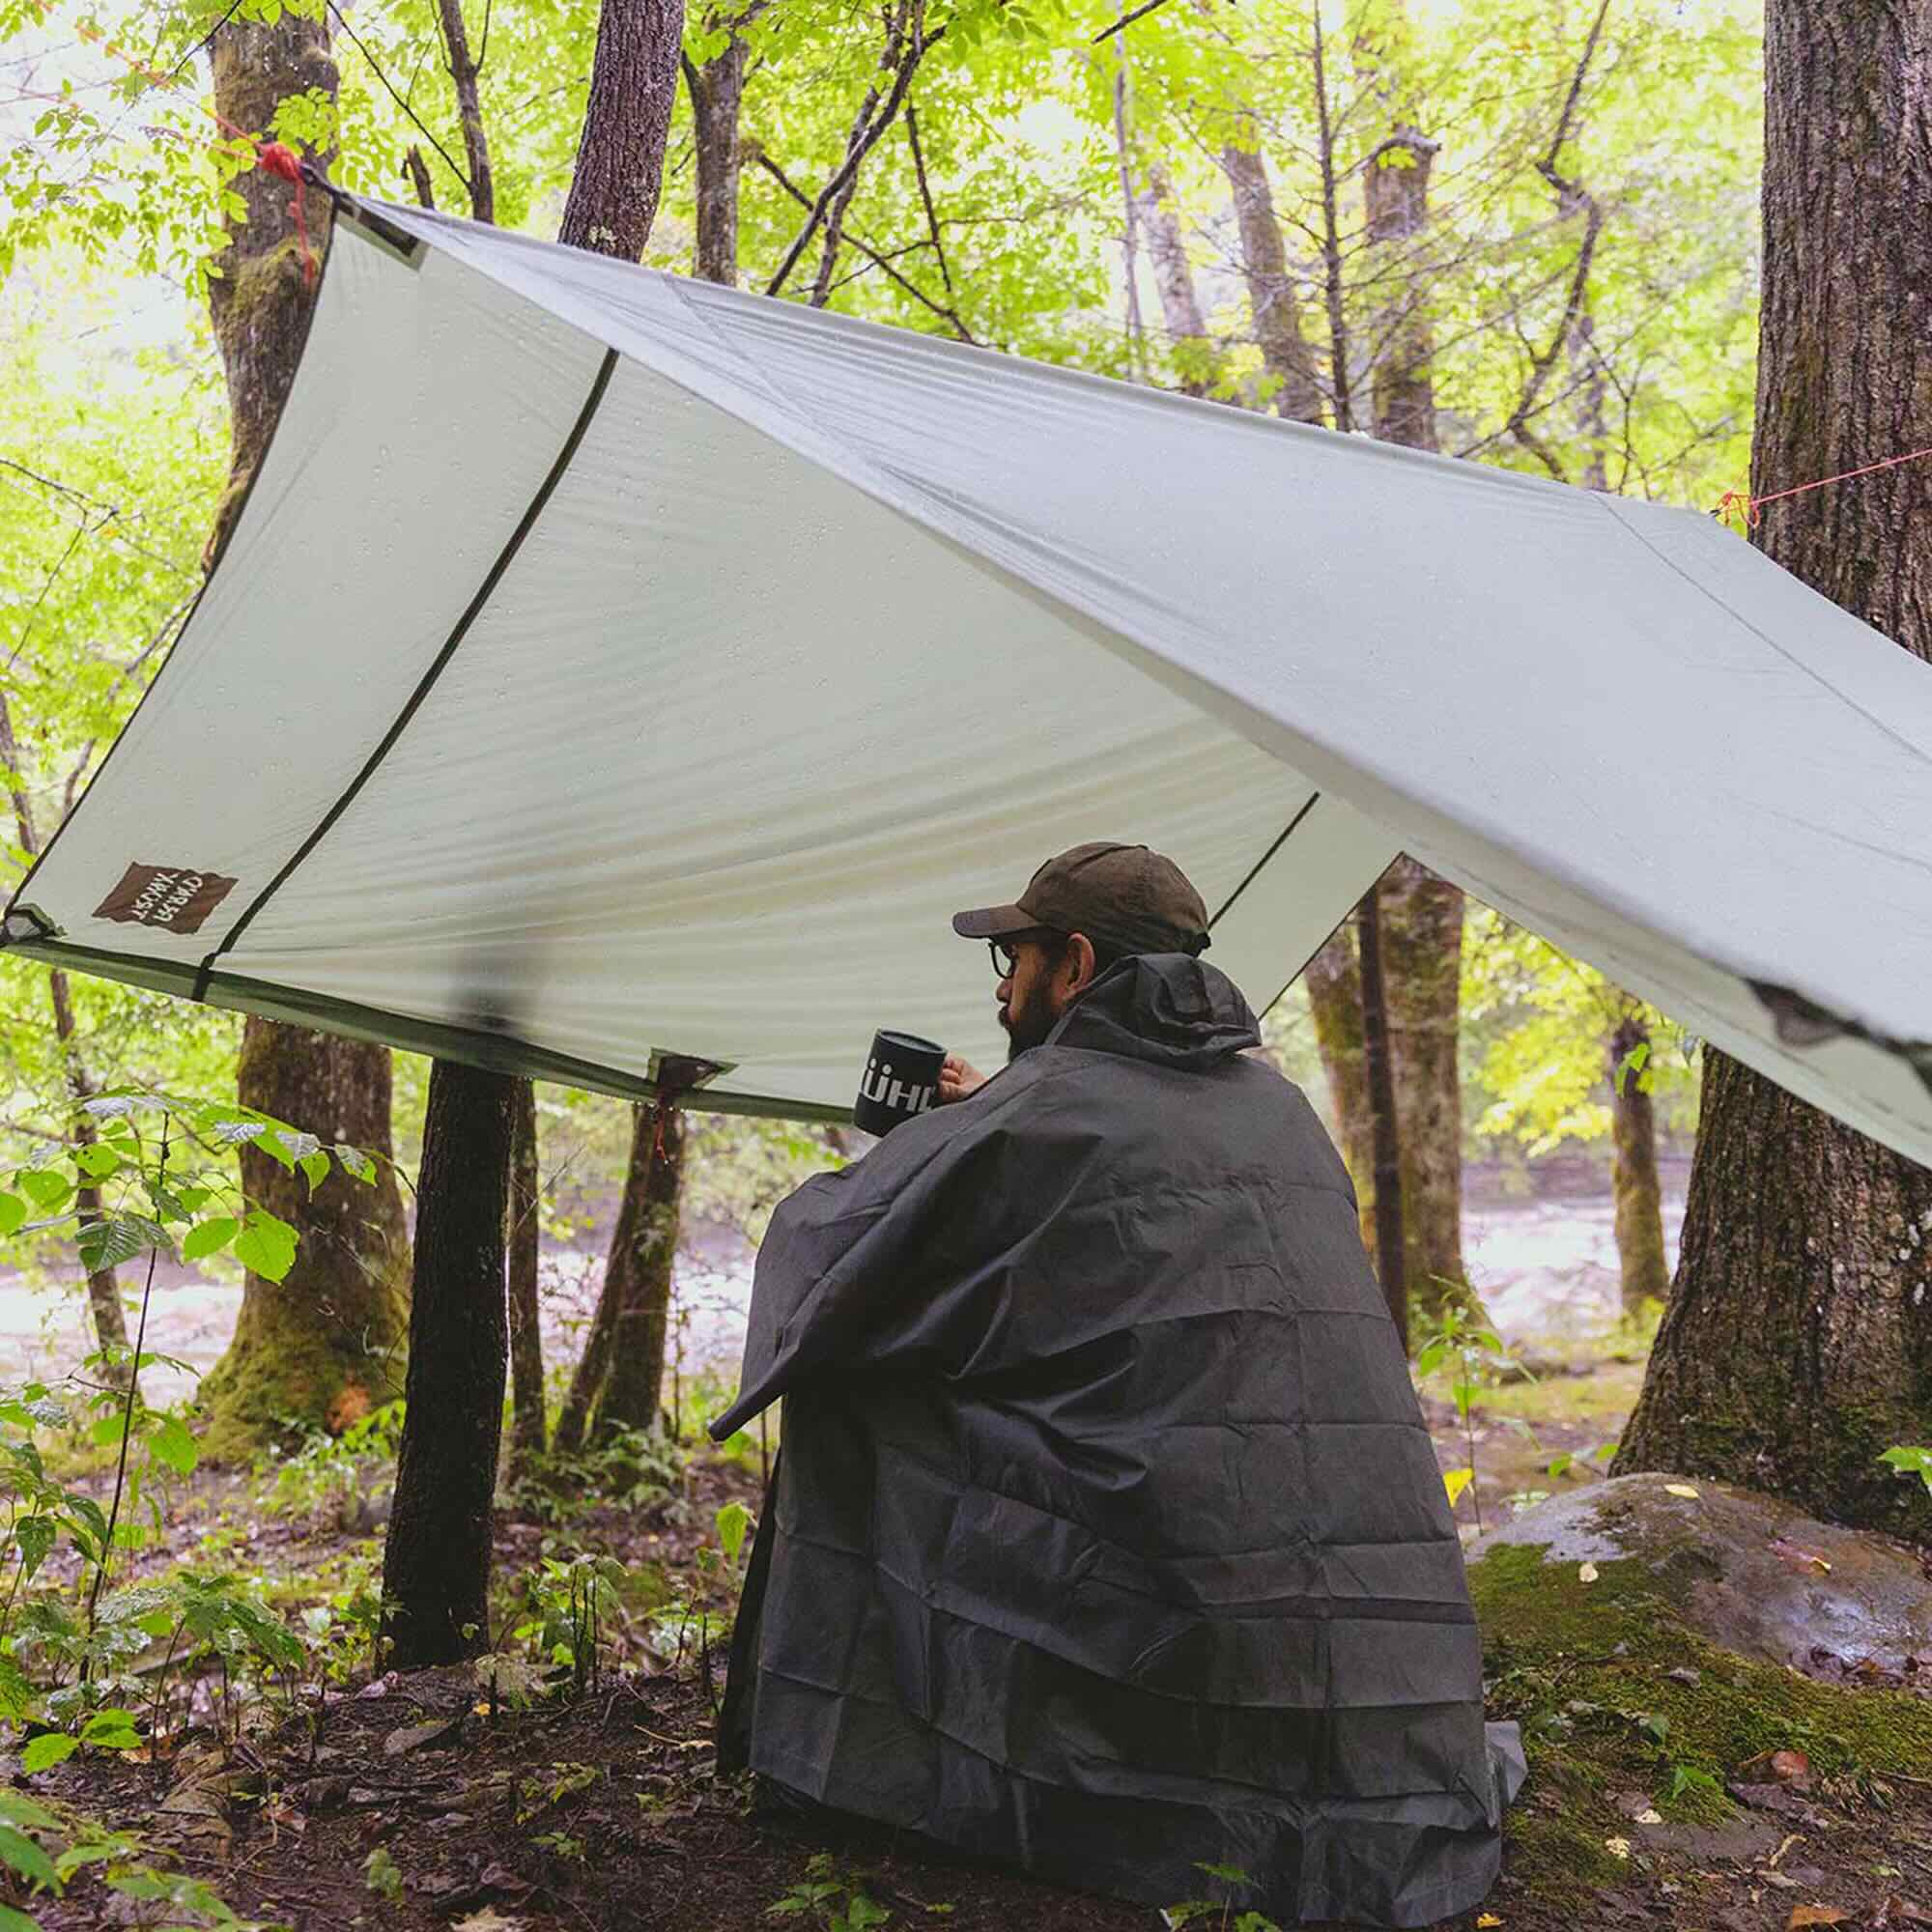 Grand Trunk Moab All-In-One Shelter Hammock (green)